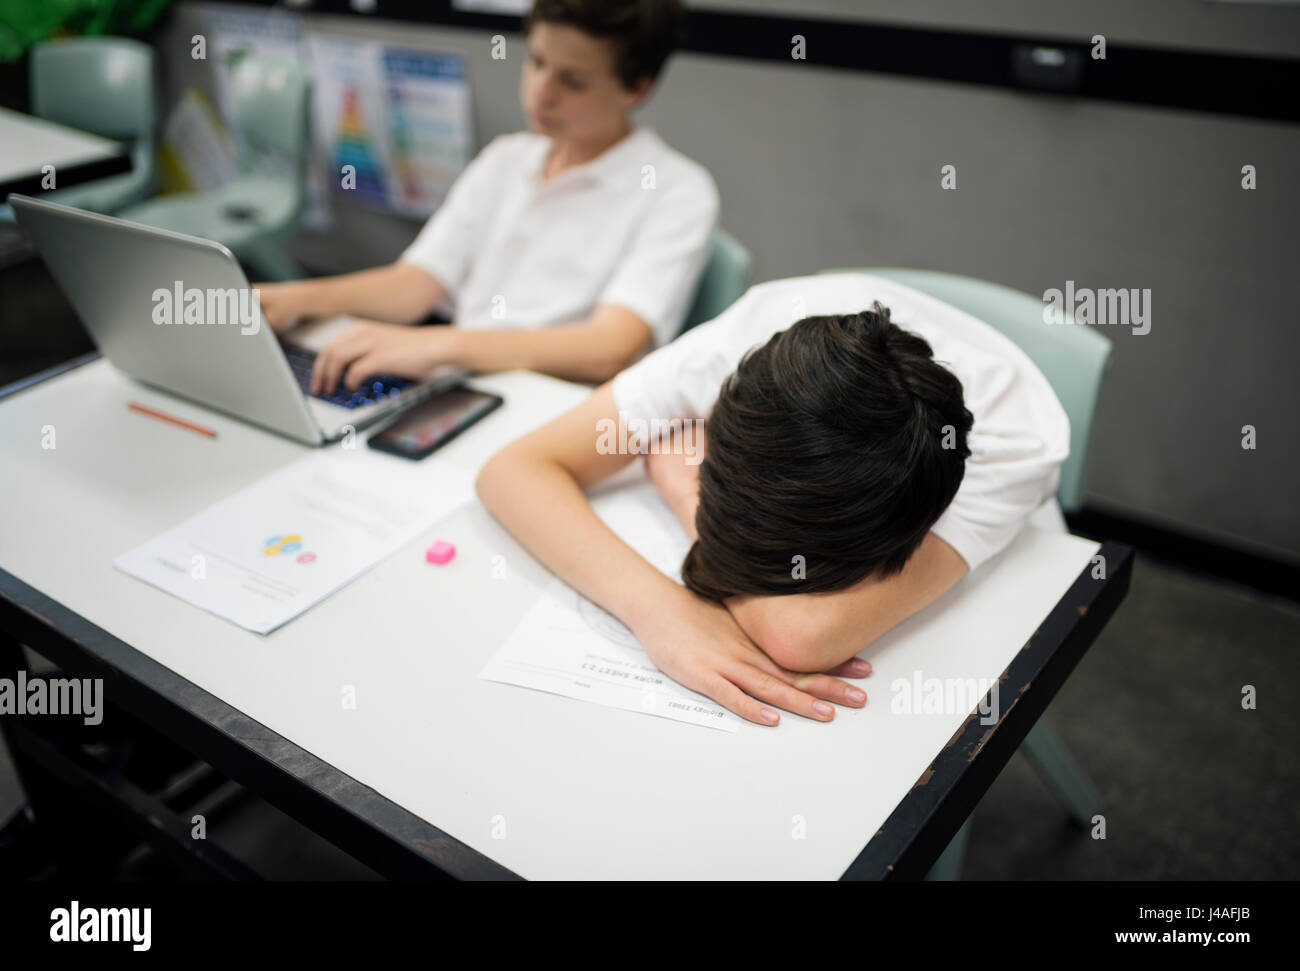 Students in uniform e-learning and sleeping Stock Photo